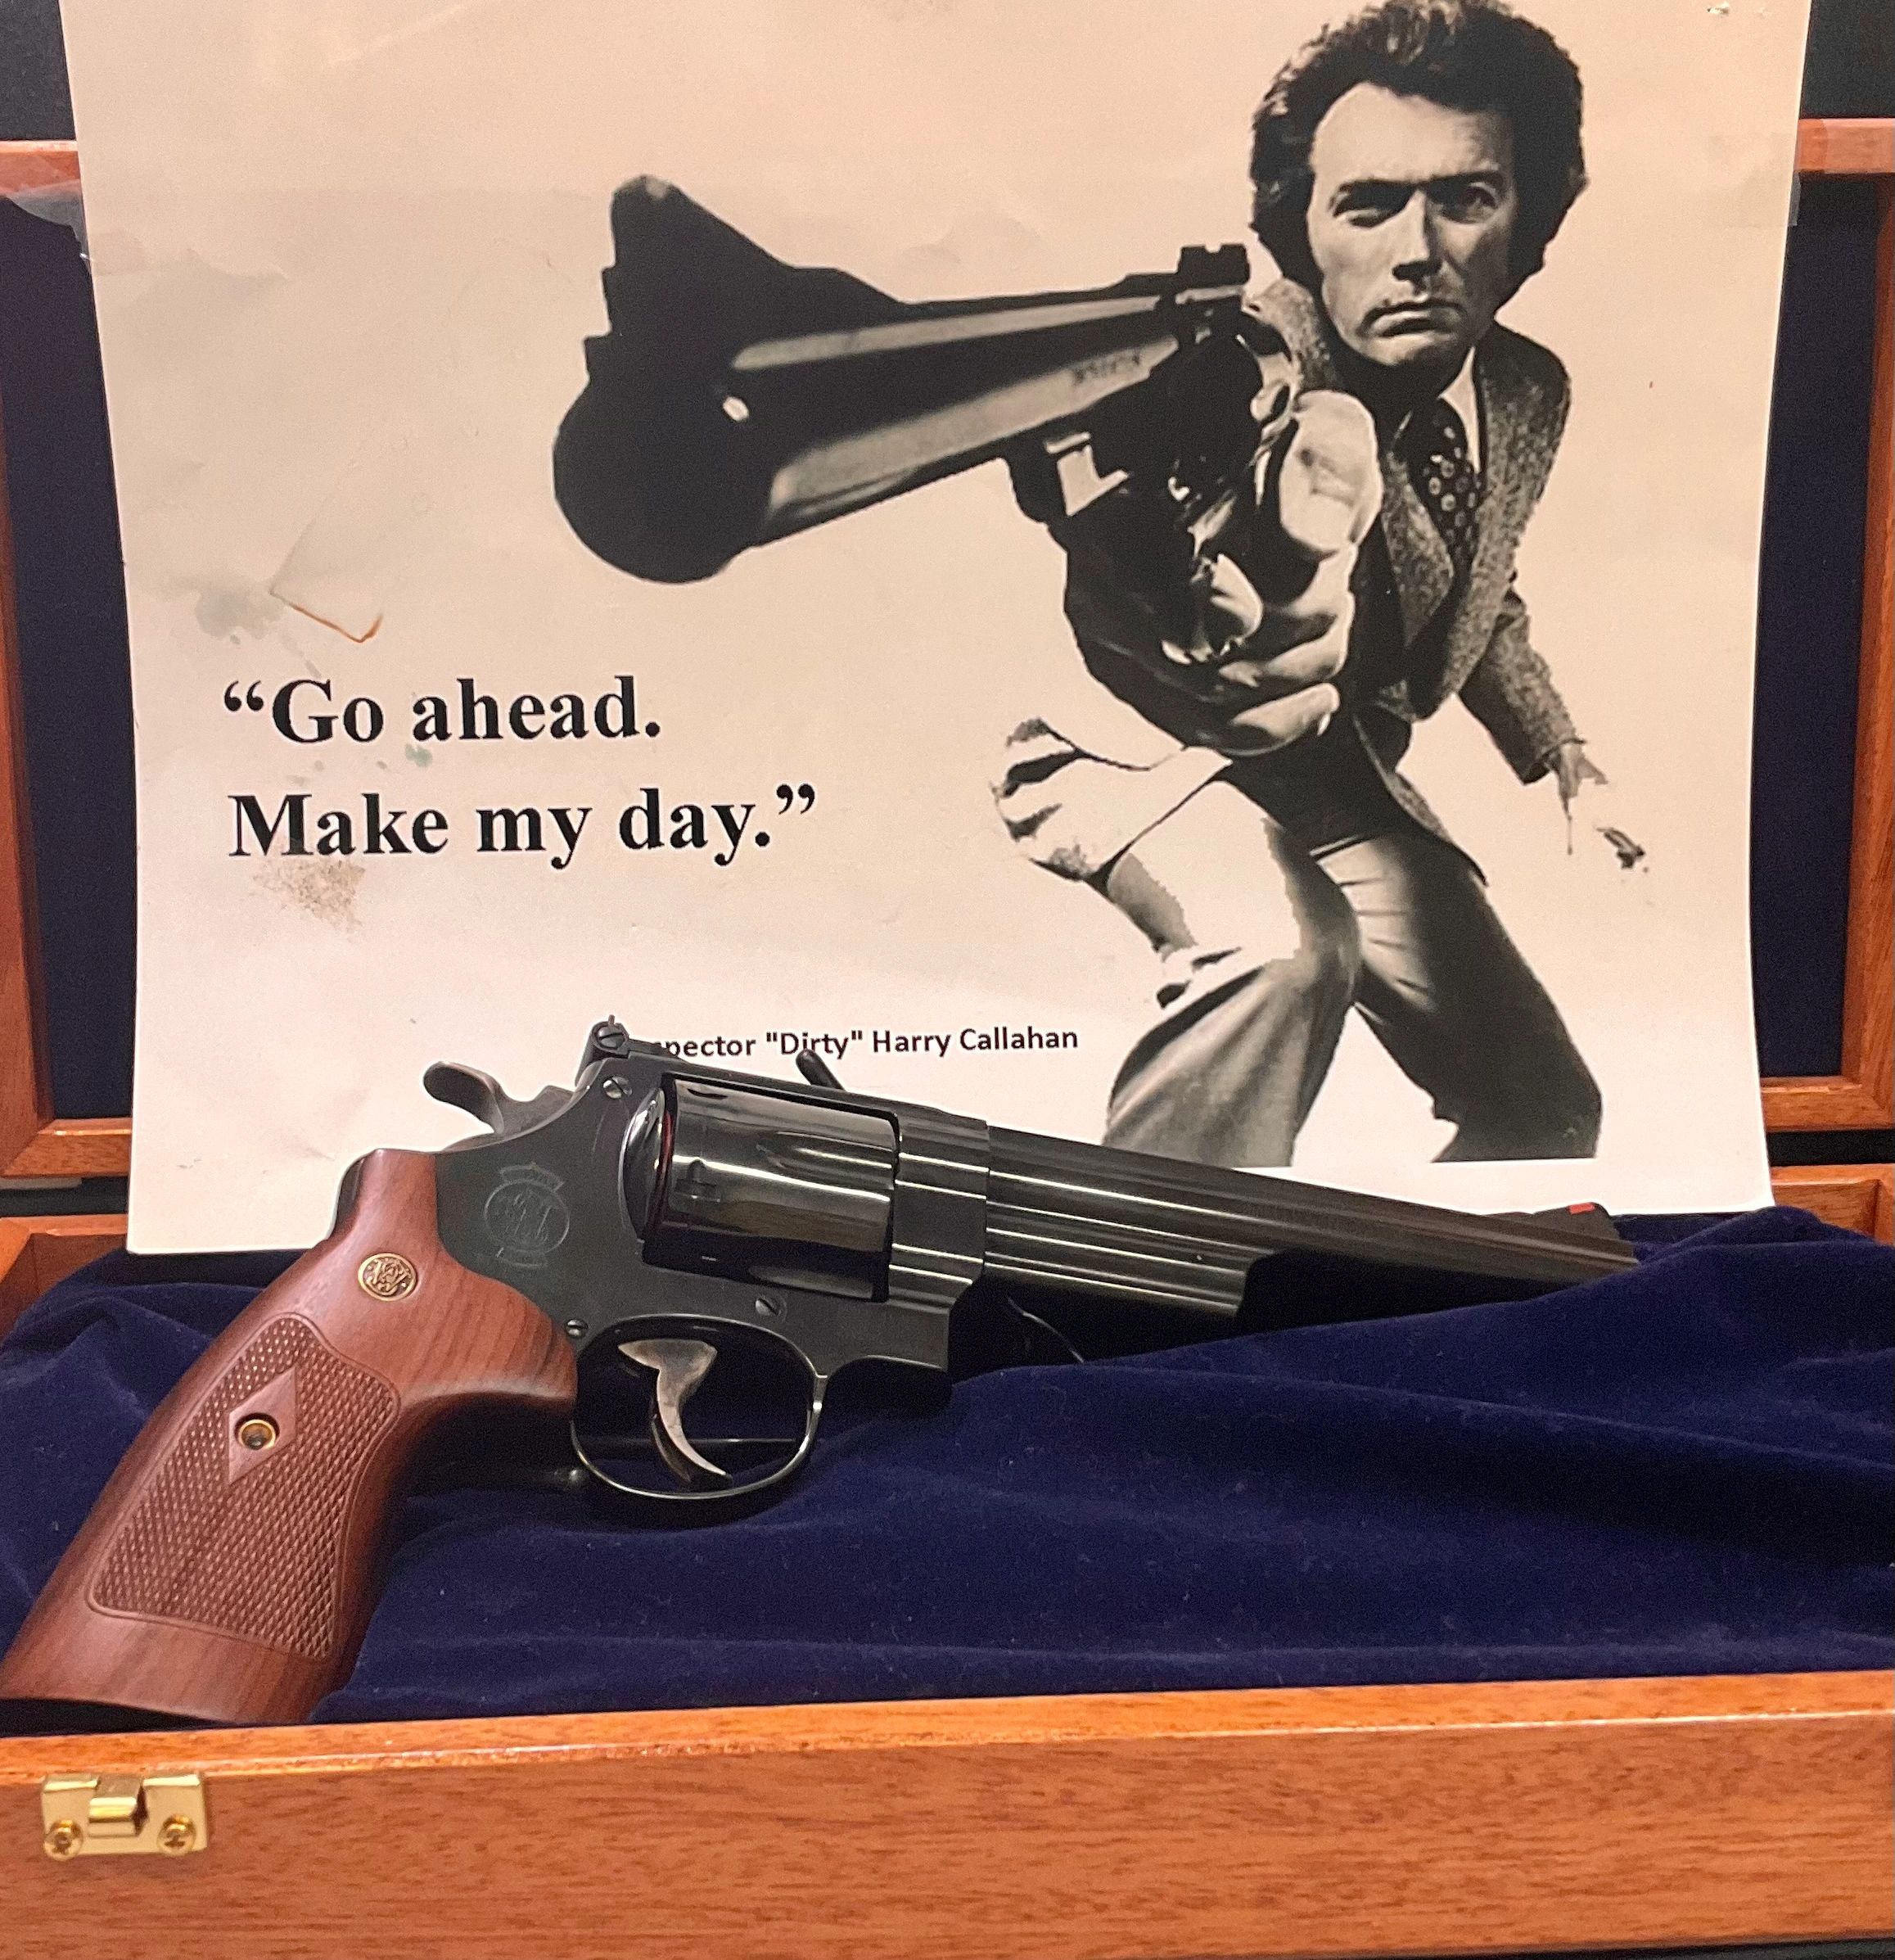 SMITH & WESSON MODEL 29-10 “Dirty Harry” $1399.99
Stop in or Call for Purchase